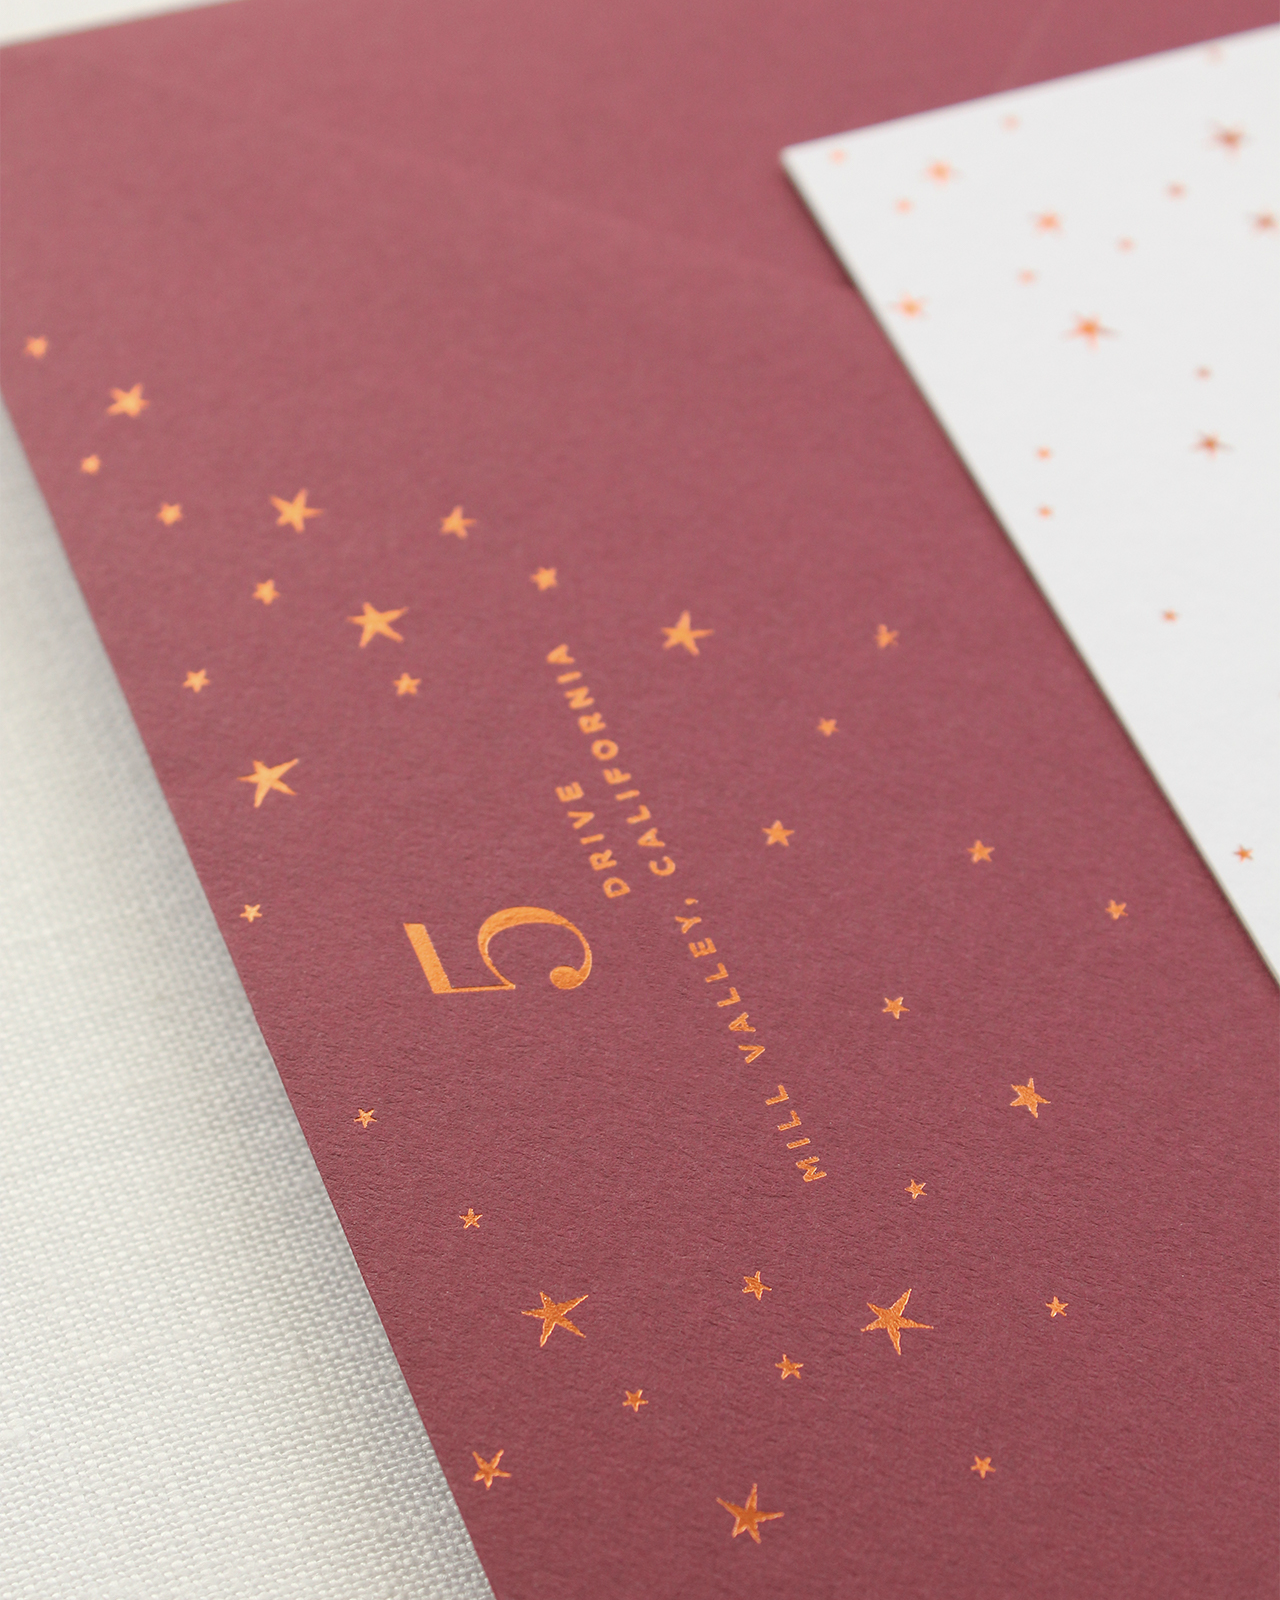 Refined Copper and Burgundy Star Inspired Baby Shower Invitations by Bourne Paper Co.